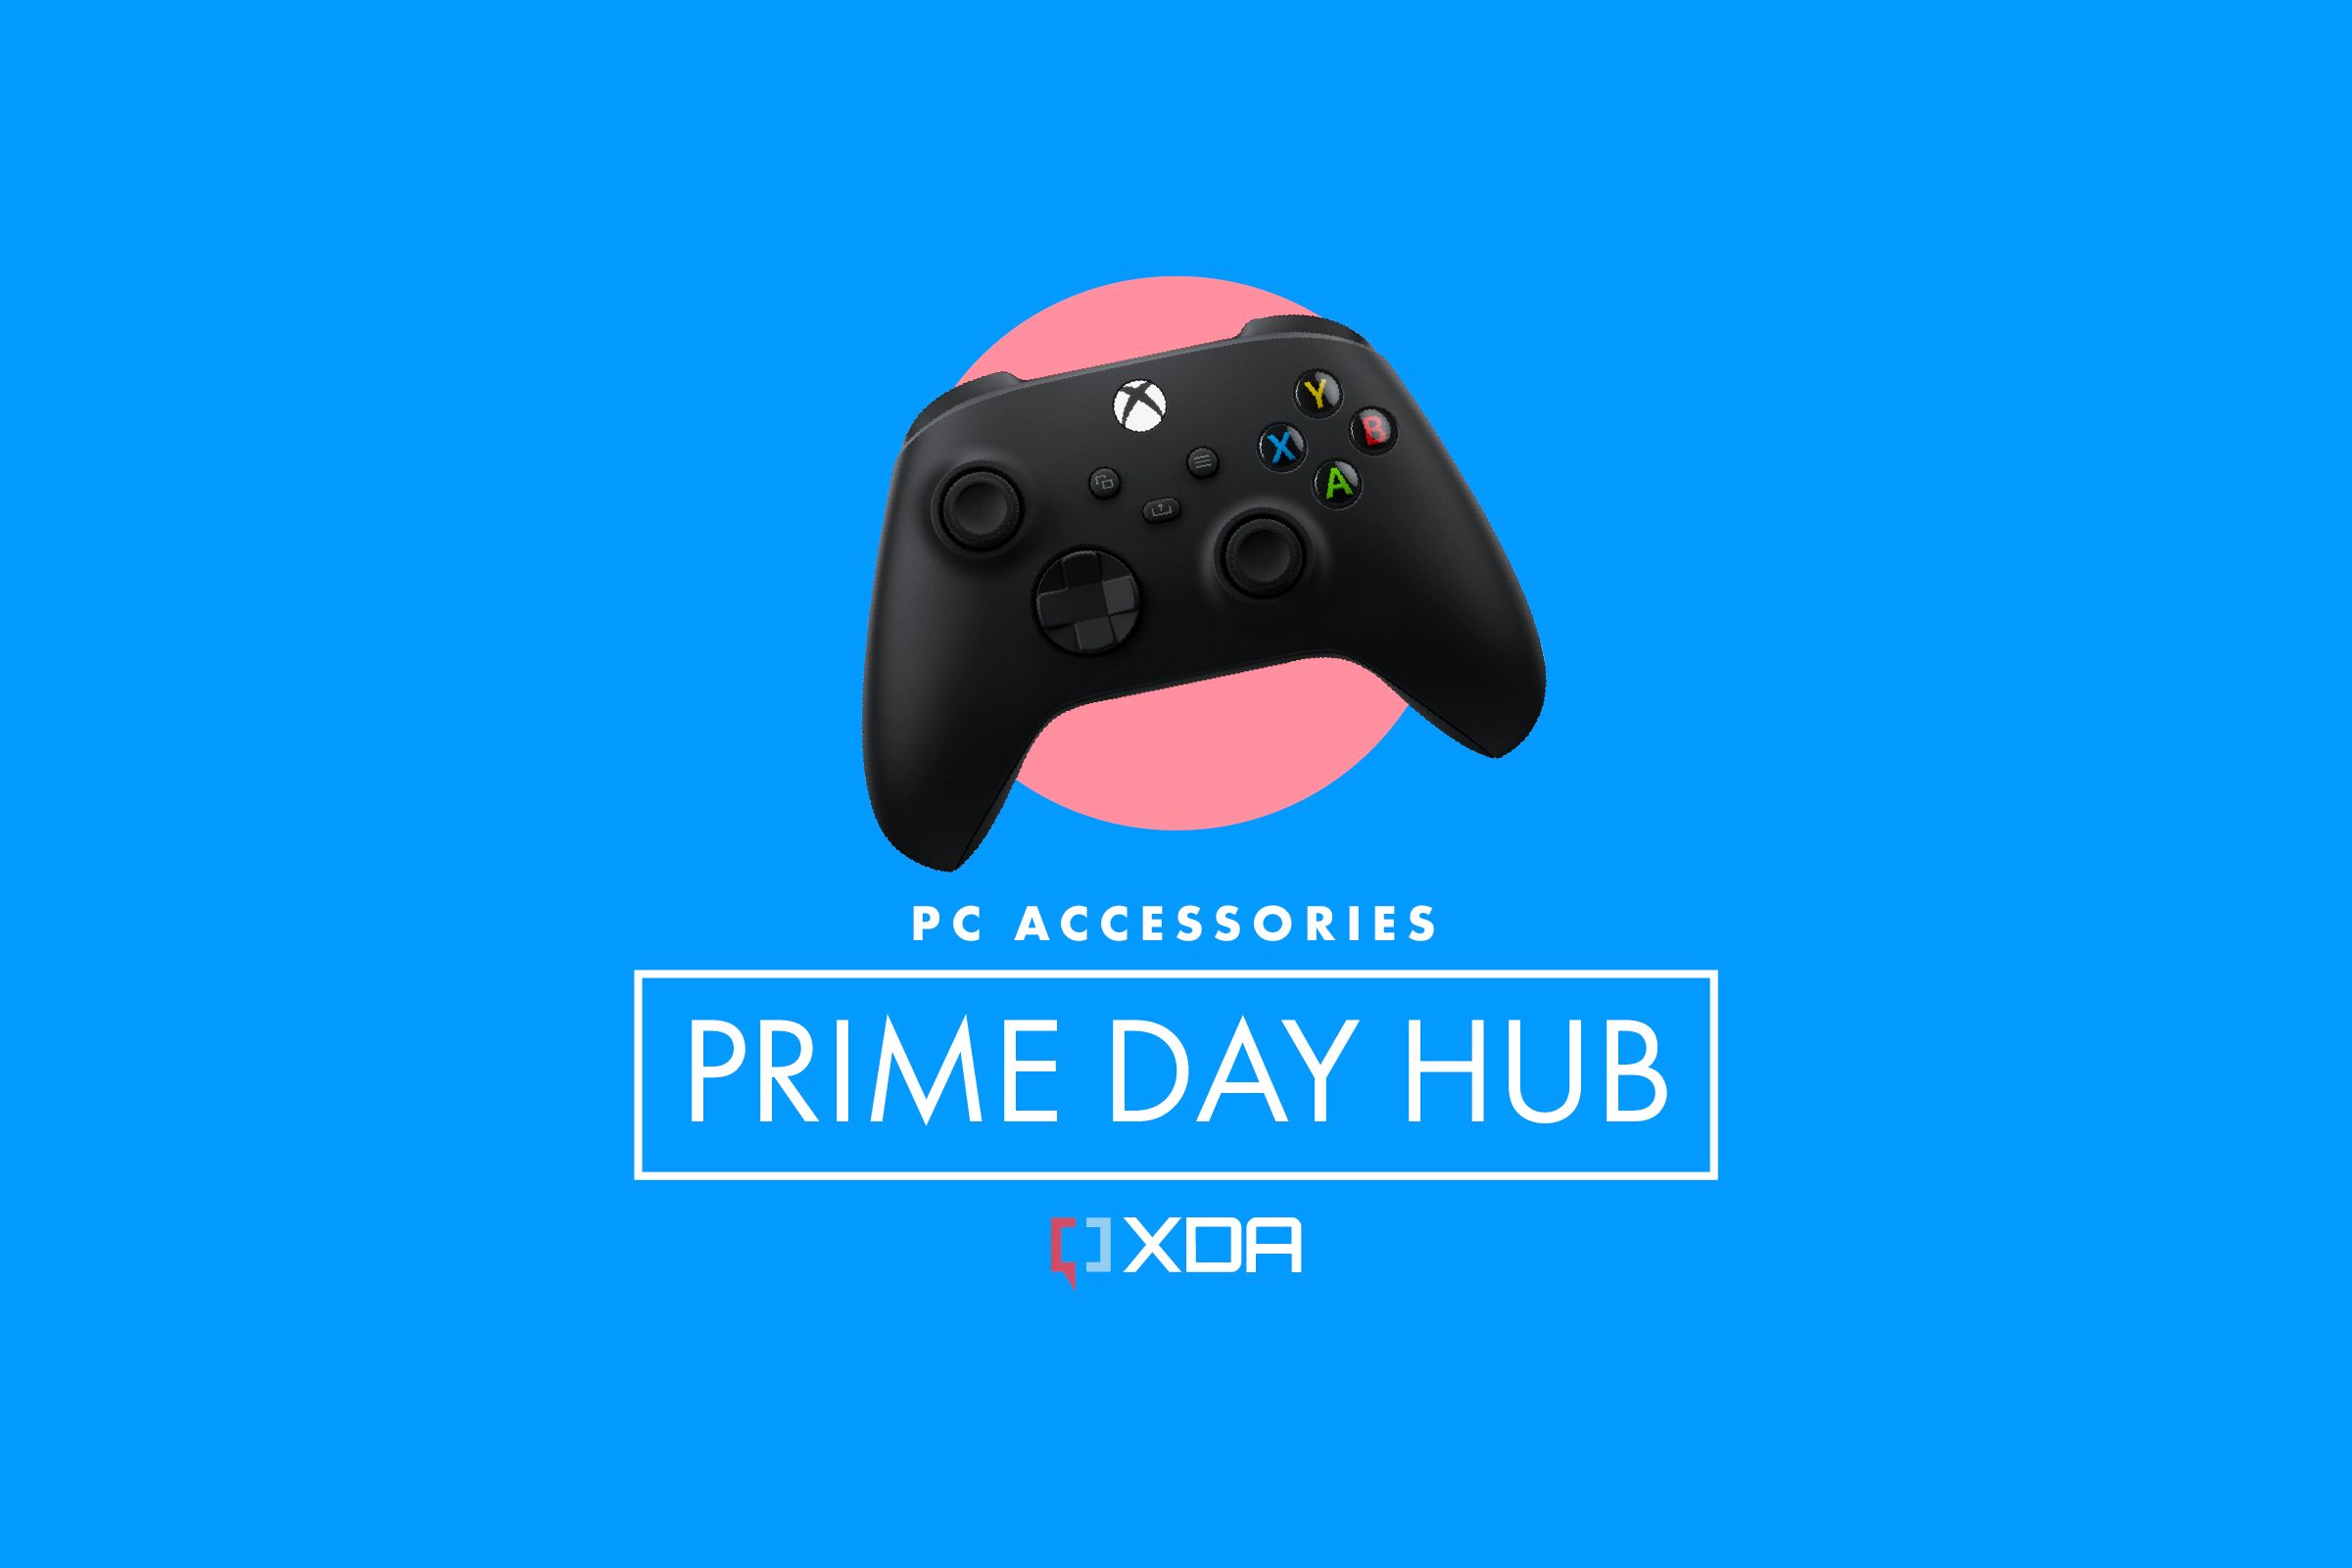 https://static1.xdaimages.com/wordpress/wp-content/uploads/2023/06/pc-accessories-prime-day-hub.jpg